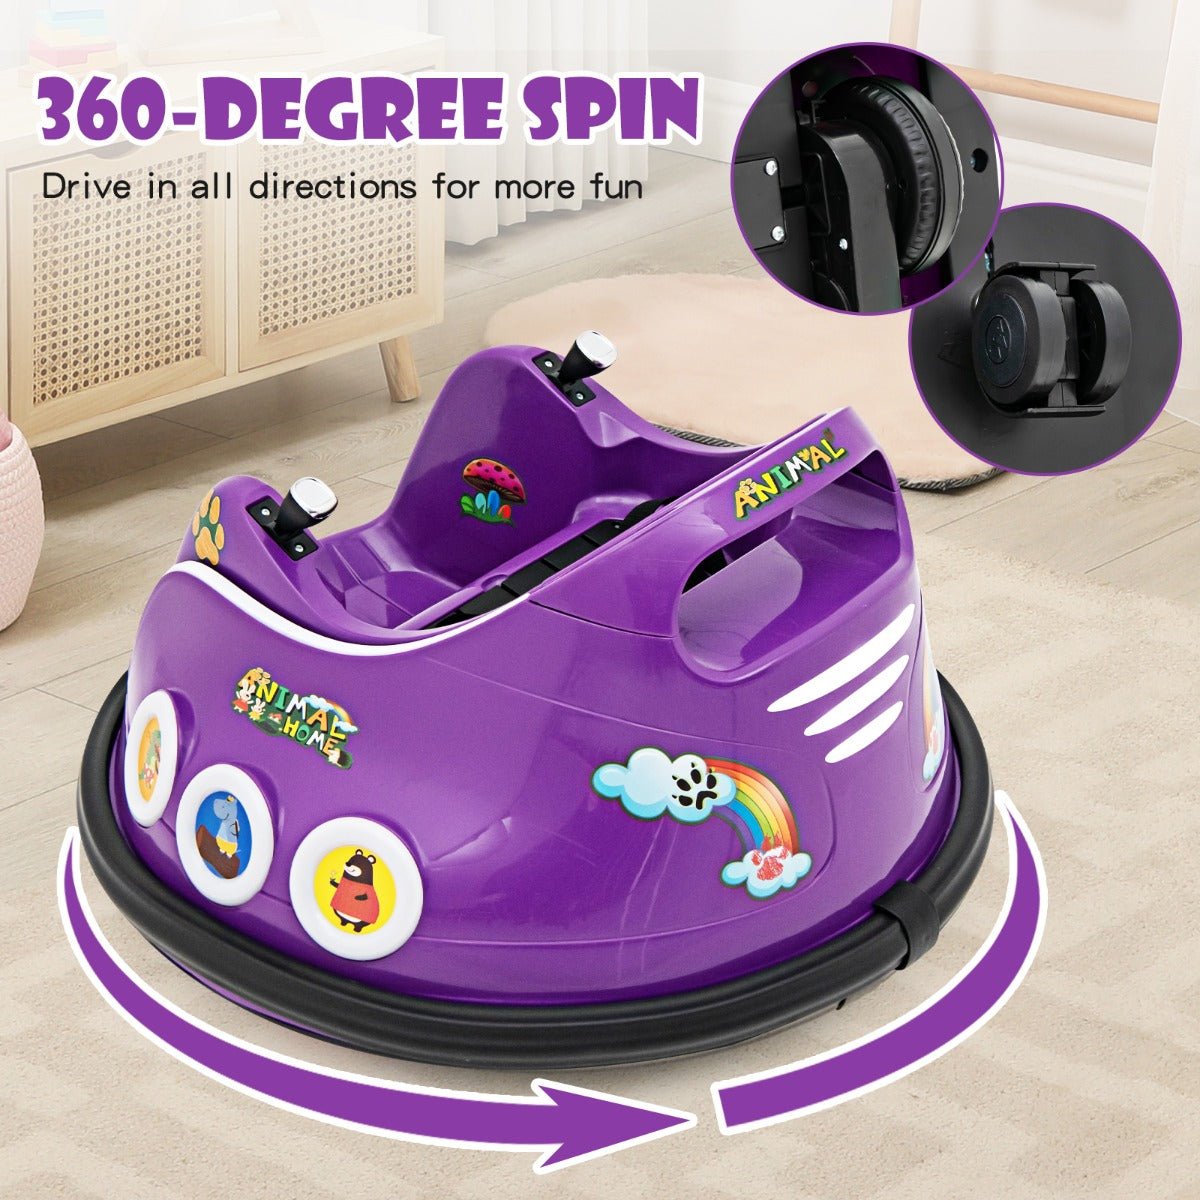 Experience Joy with the Purple Ride-On Bumper Car